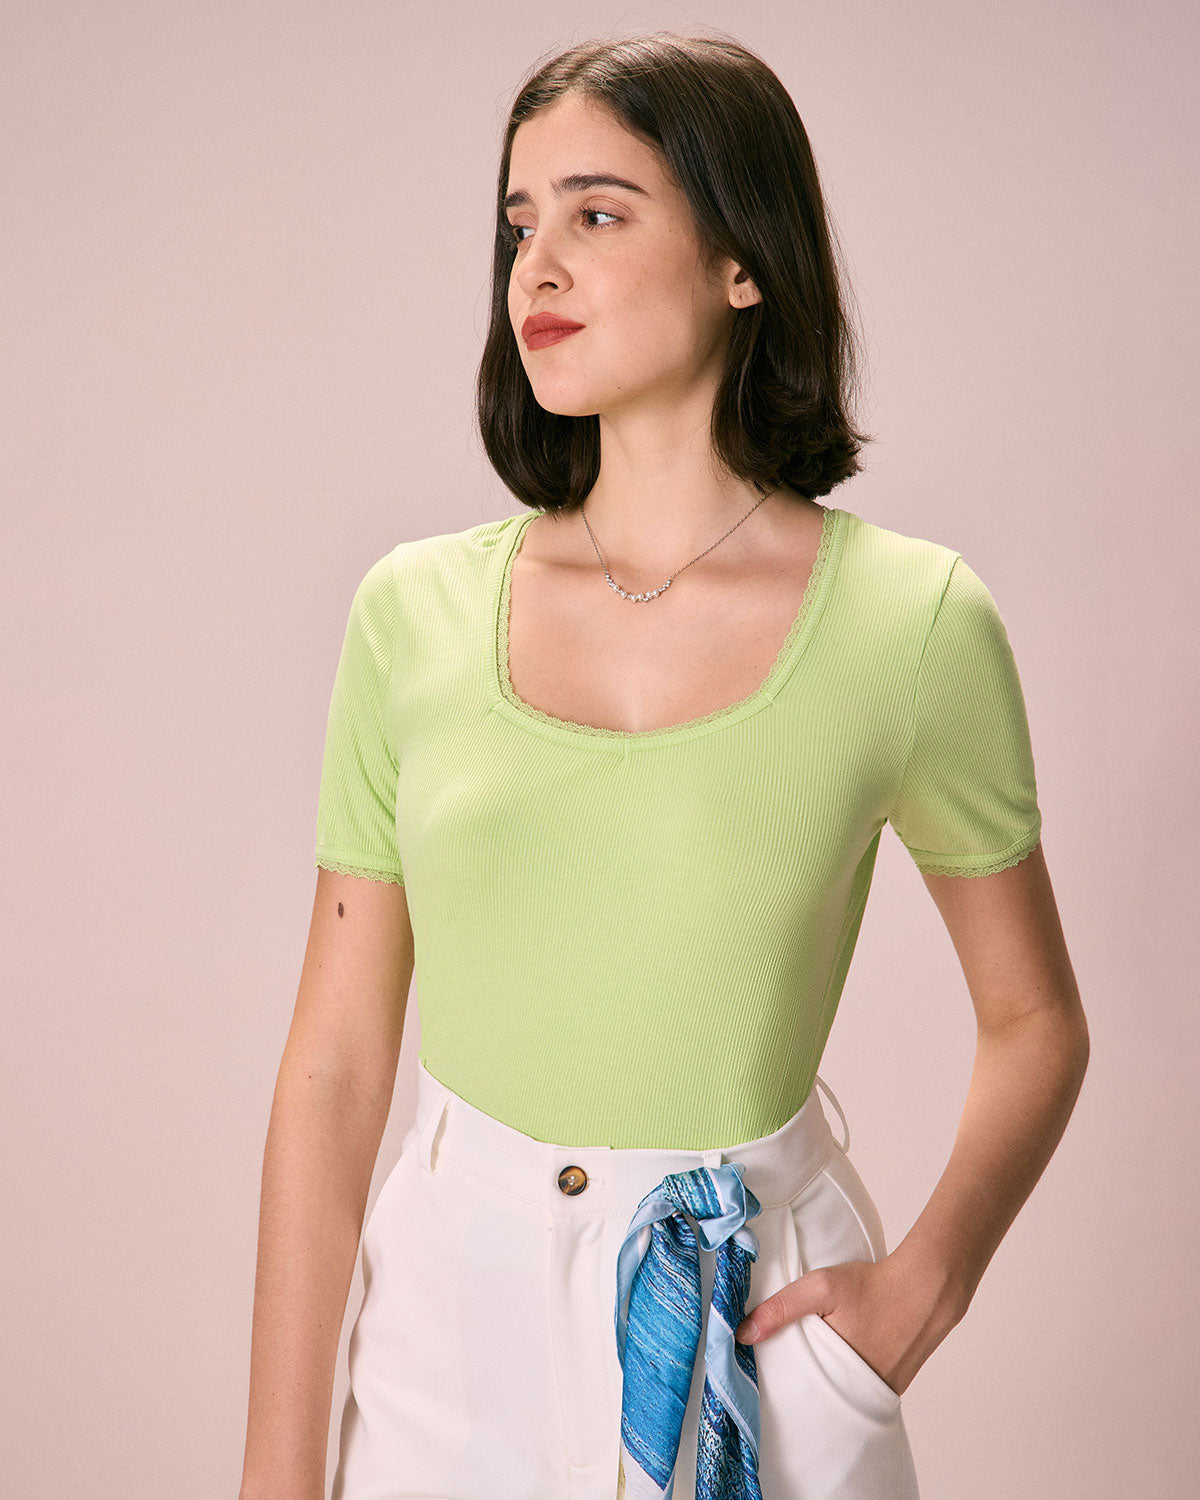 The Green Lace Trim Knit Tee Tops - RIHOAS